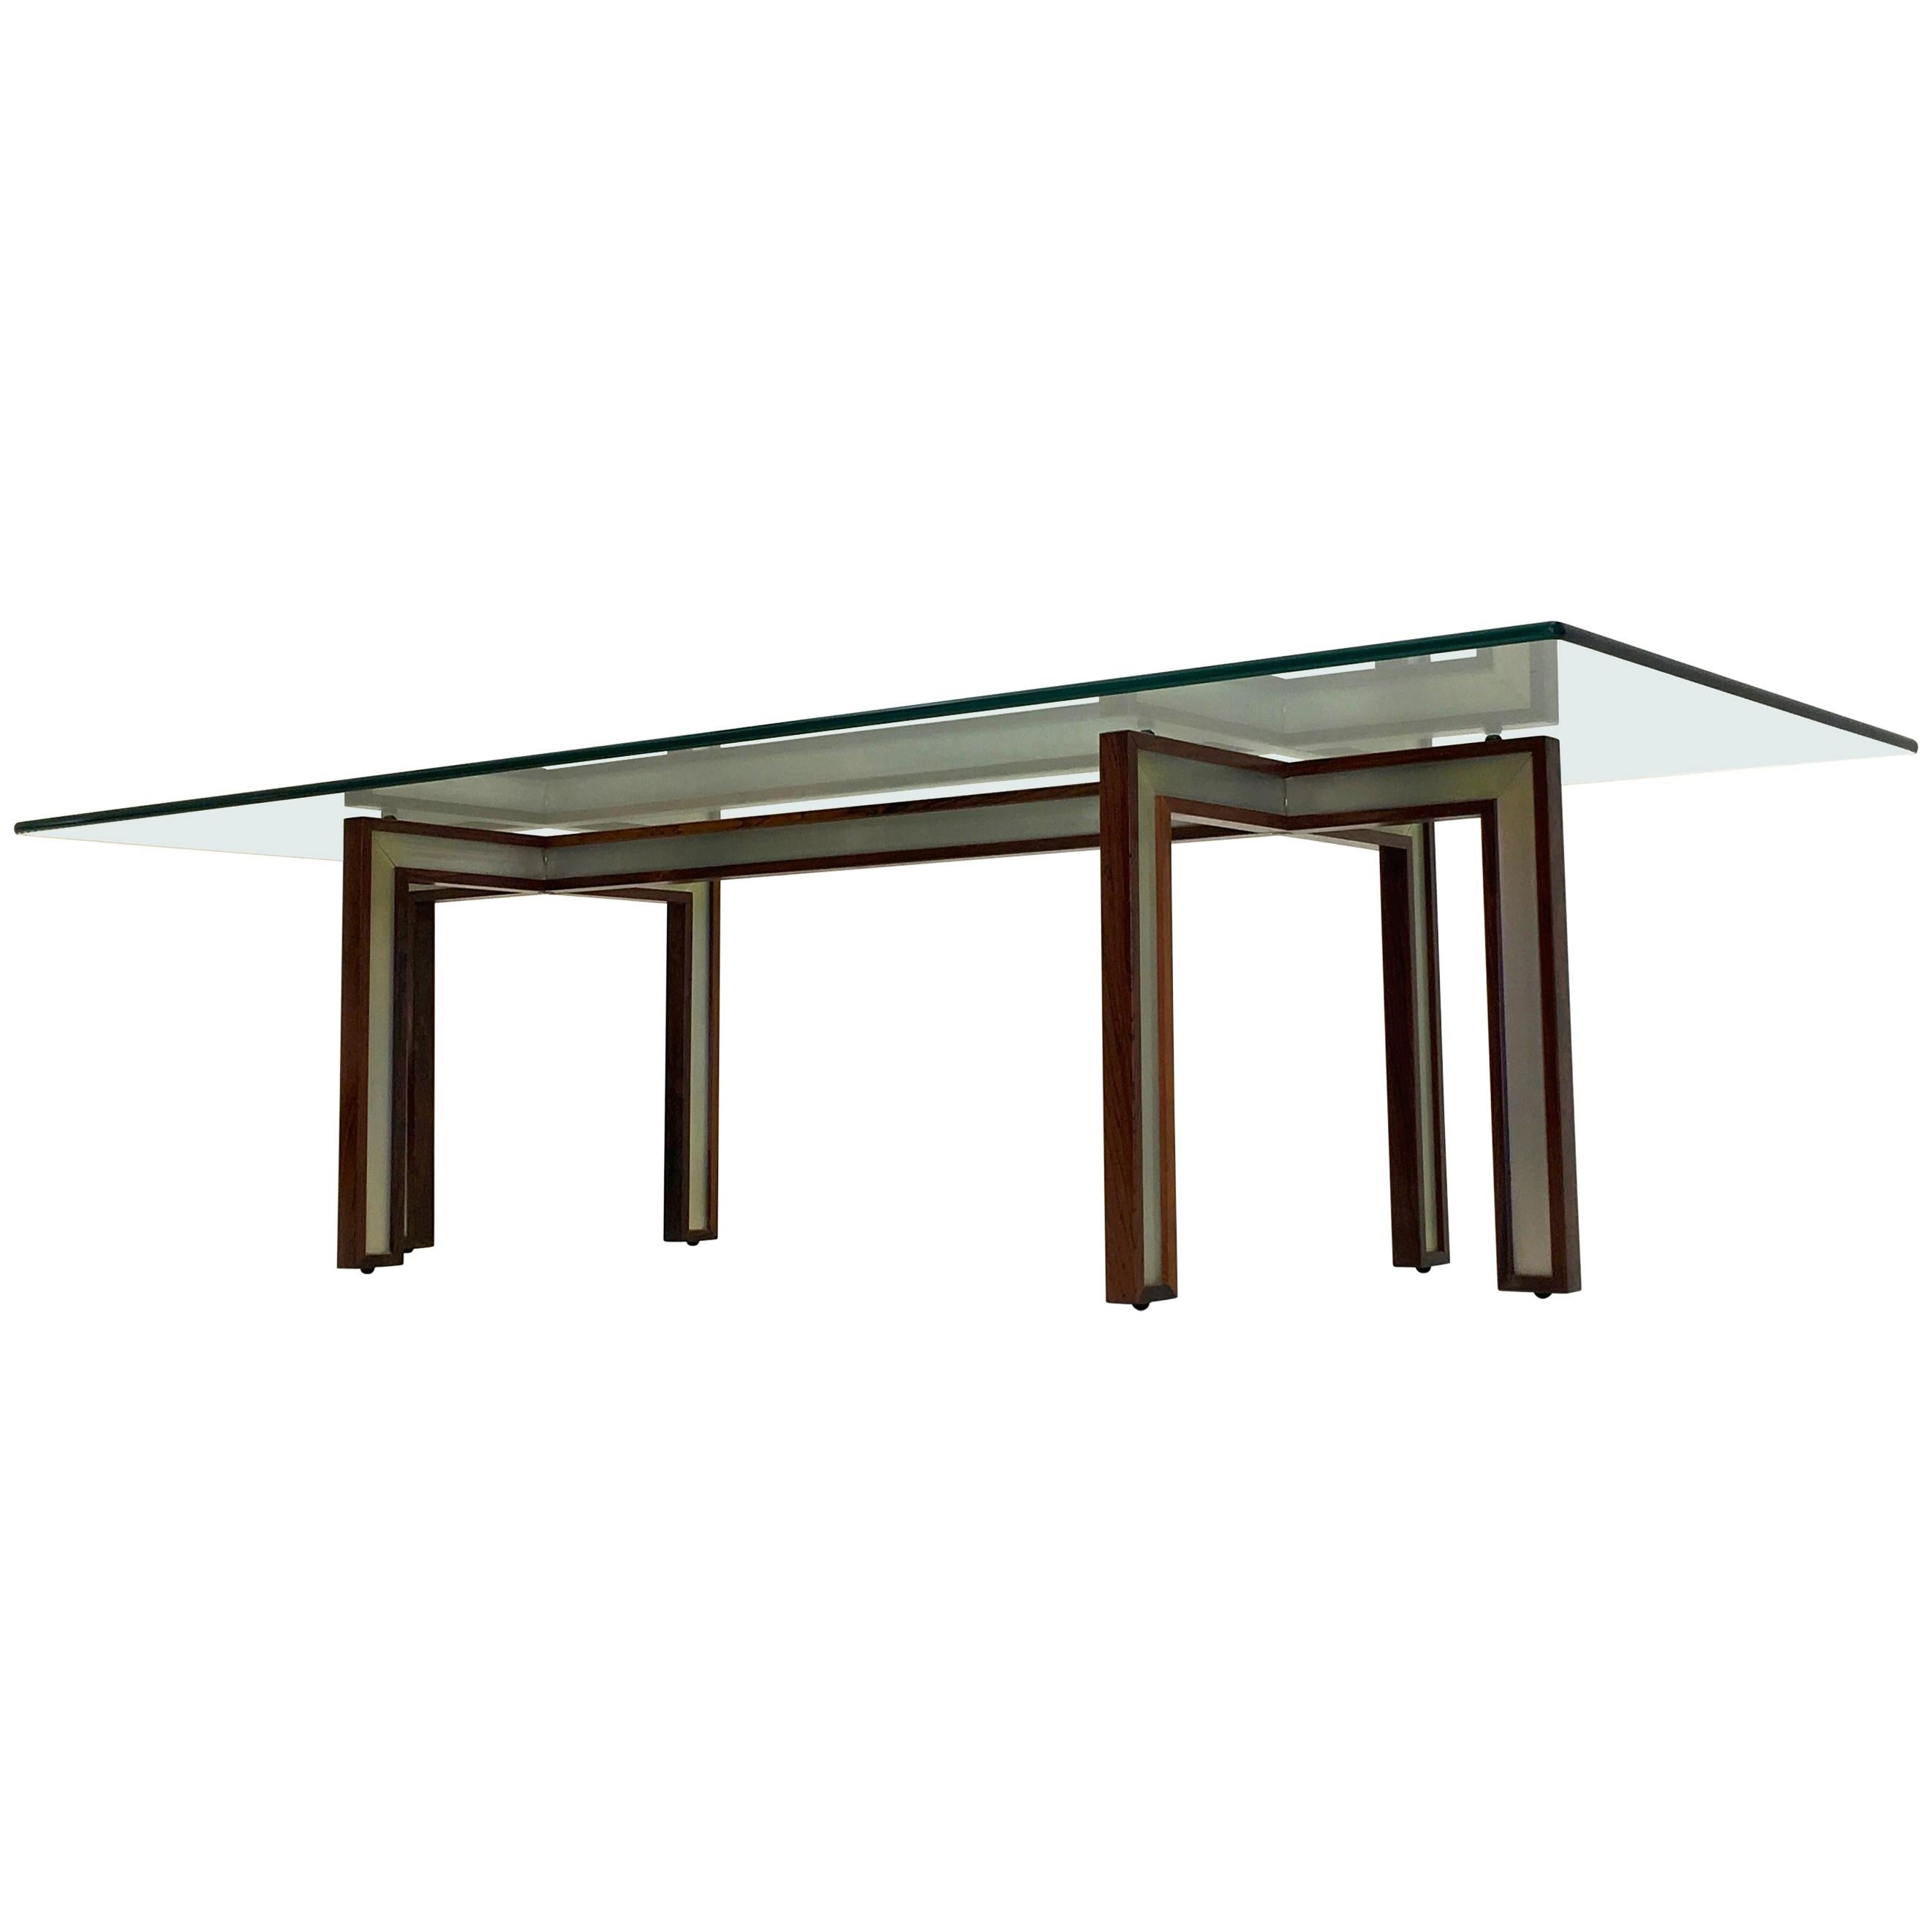 Danish Glass Coffee Table by Henning Korch with Rosewood and Aluminum Frame